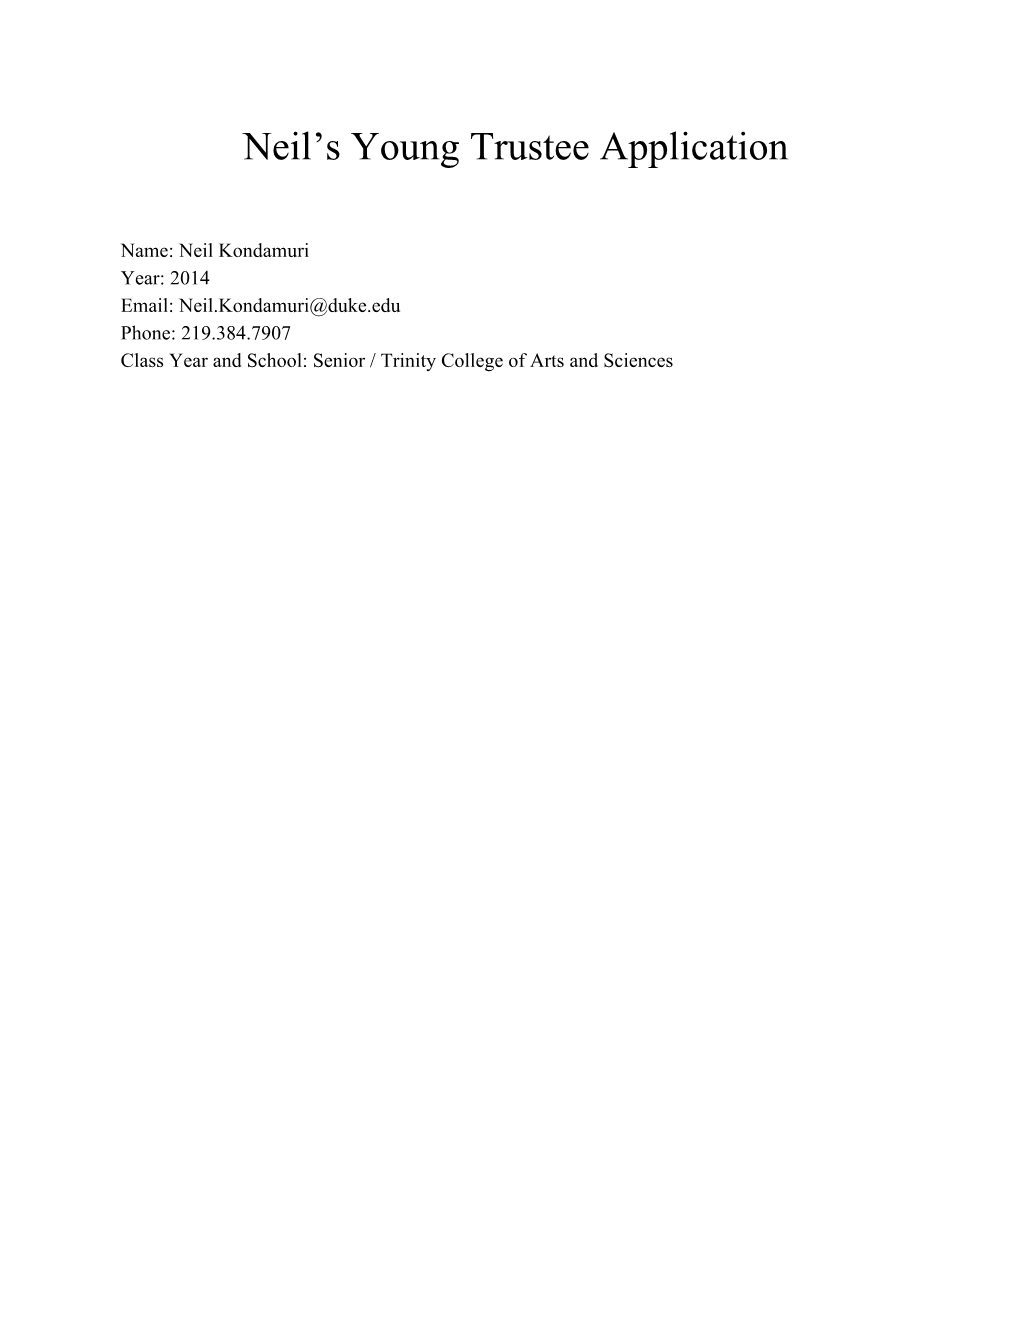 Neil's Young Trustee Application